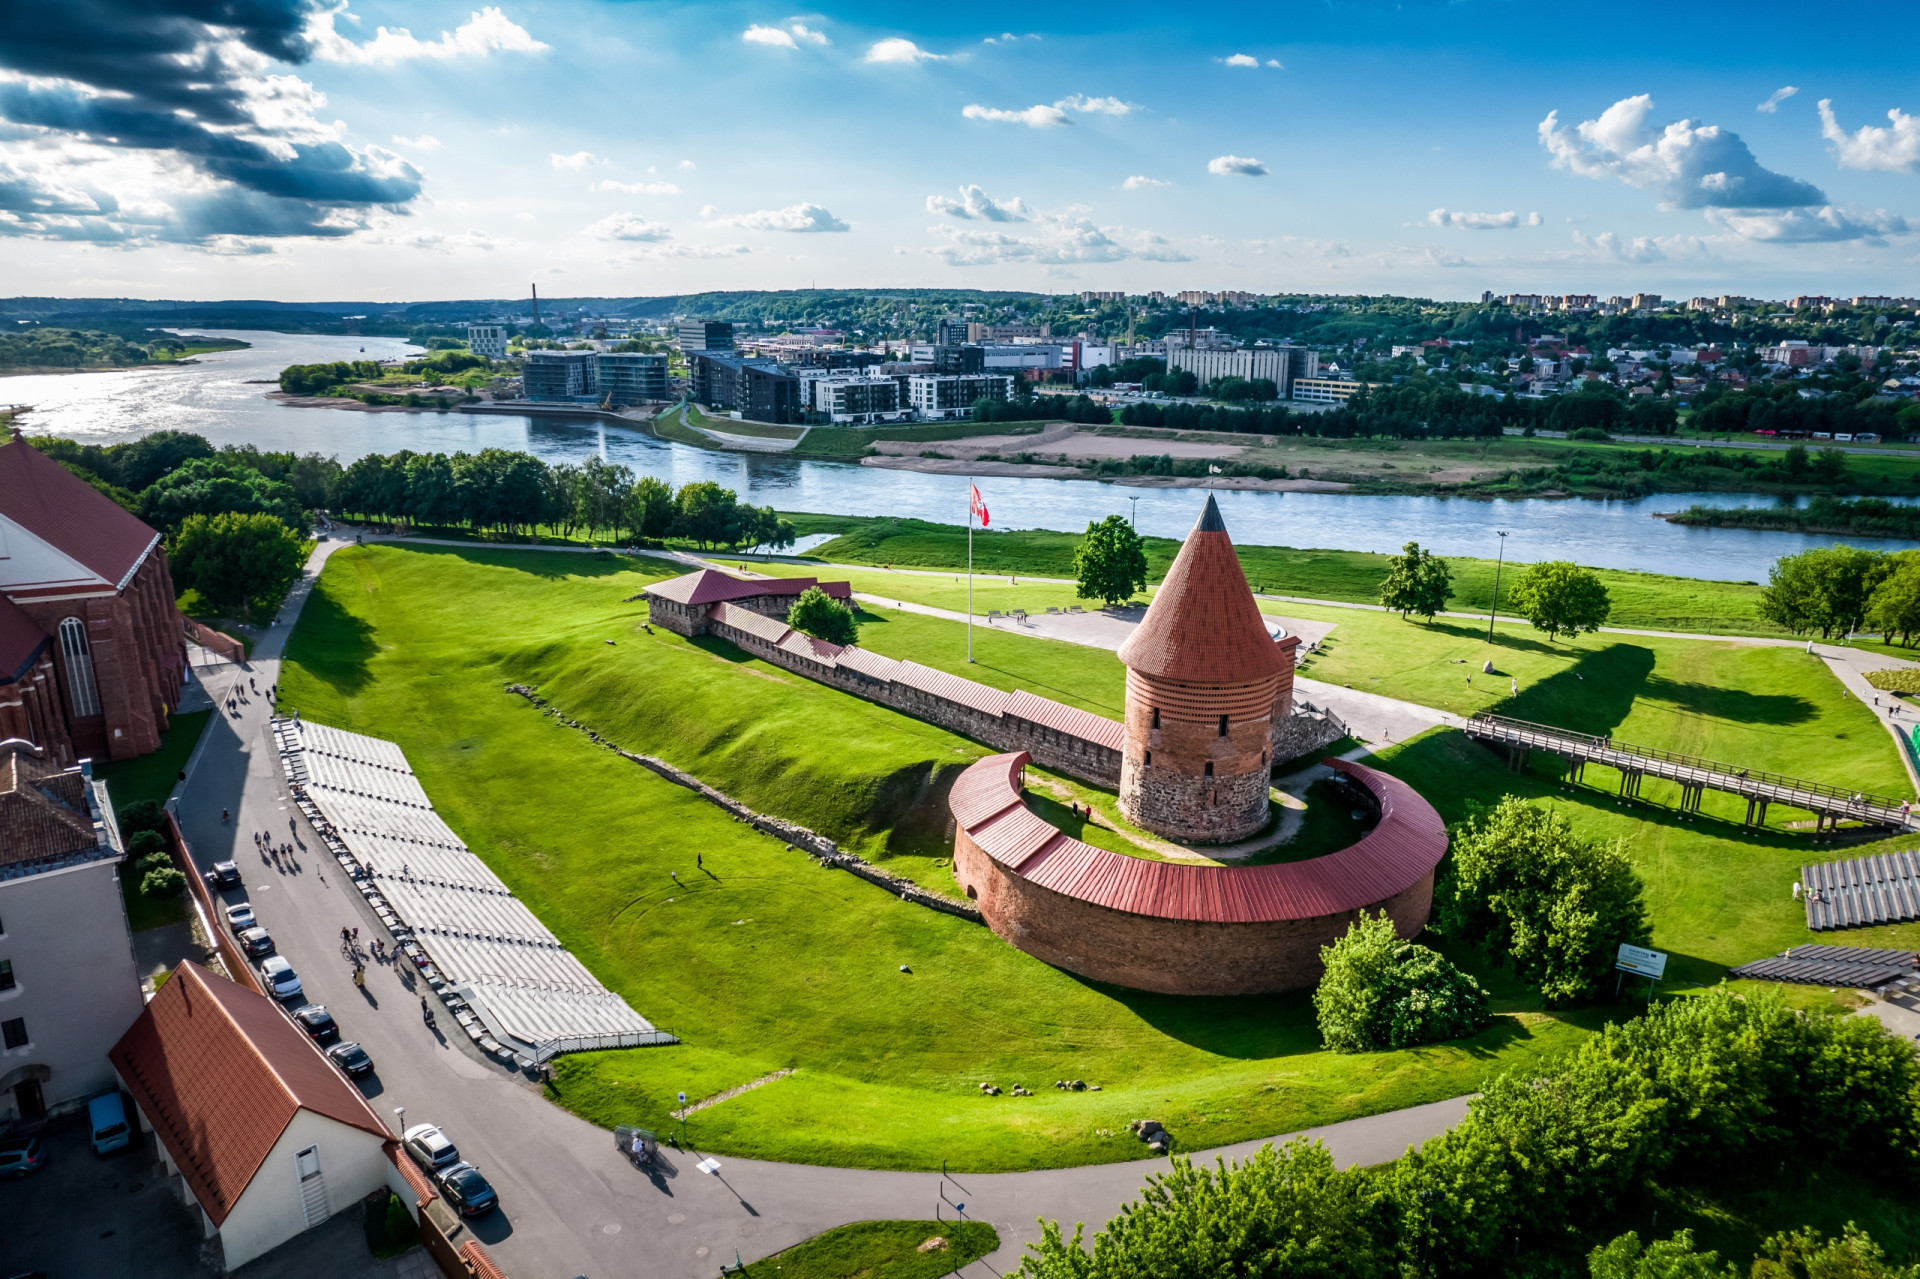 <p>Once you leave Ostrava, you can fly to the fourth country of this world record: Lithuania. Landing in the city of Kaunas would take you about an hour and a half, during which you would only be permitted a brief stop before you must jump back on the plane!</p><p>You may also like:<a href="https://www.starsinsider.com/n/231205?utm_source=msn.com&utm_medium=display&utm_campaign=referral_description&utm_content=701330en-us"> Hollywood’s chameleon: Johnny Depp’s ever-changing looks</a></p>